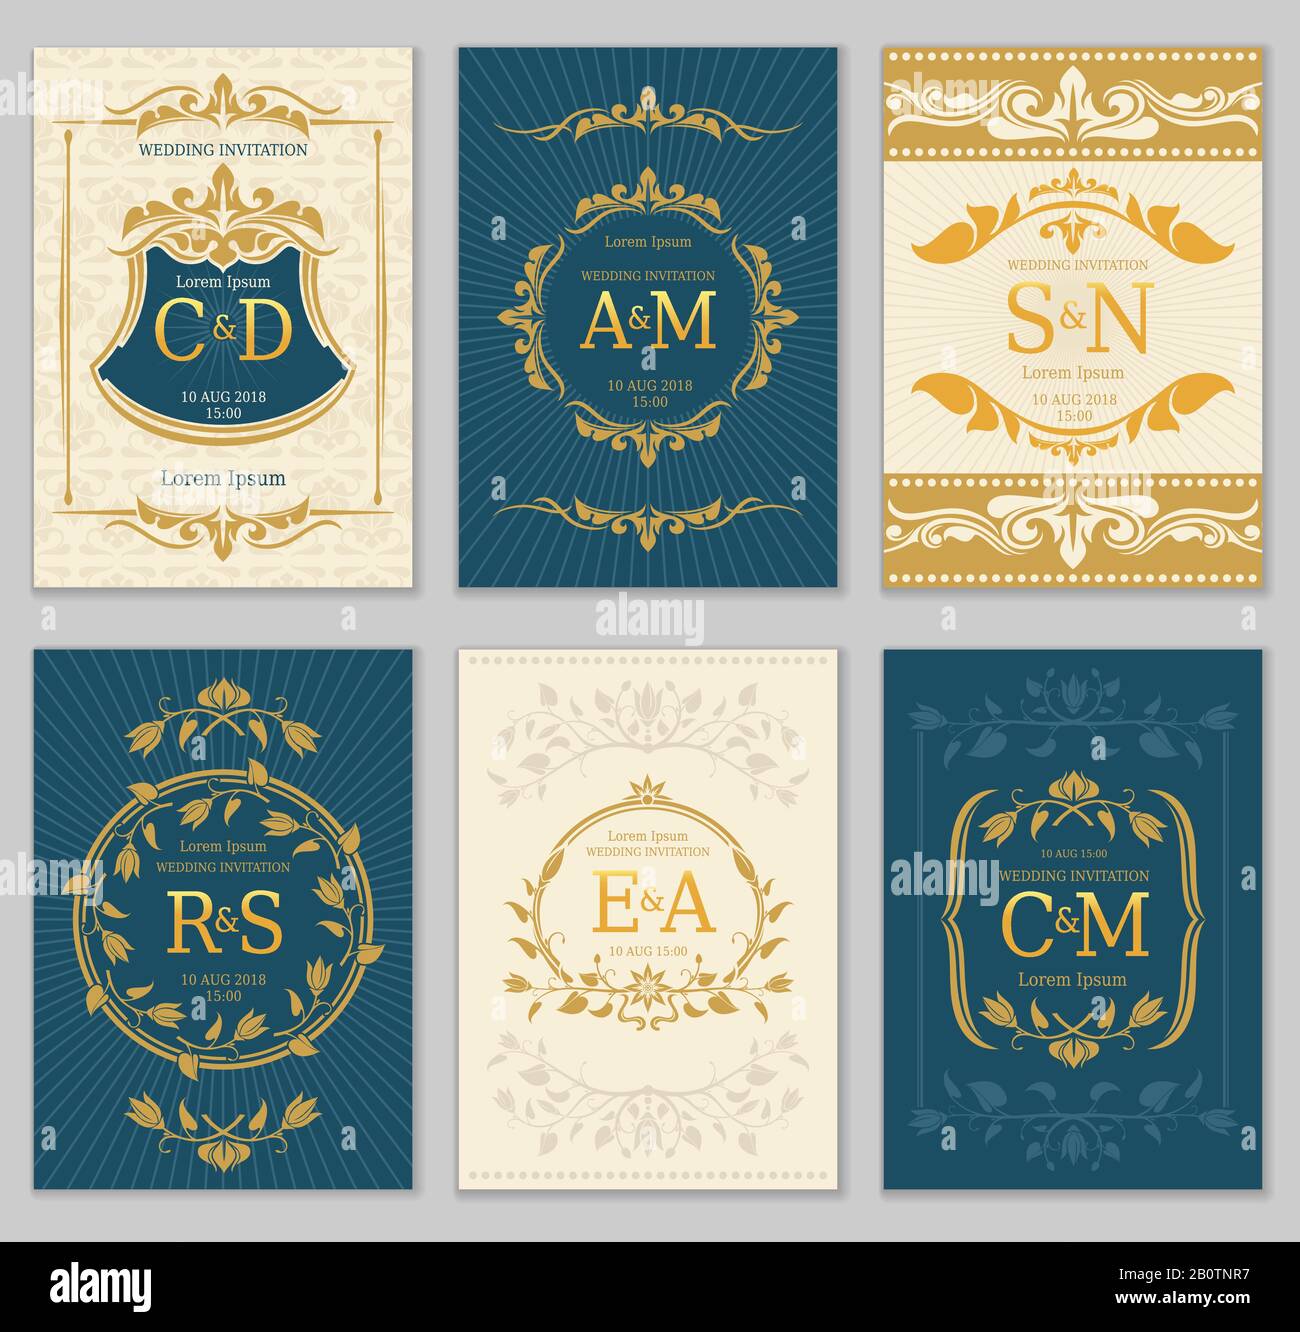 Luxury vintage wedding invitation vector cards with logo monograms and ornate frame. Classic monogram luxury label on invitation poster illustration Stock Vector